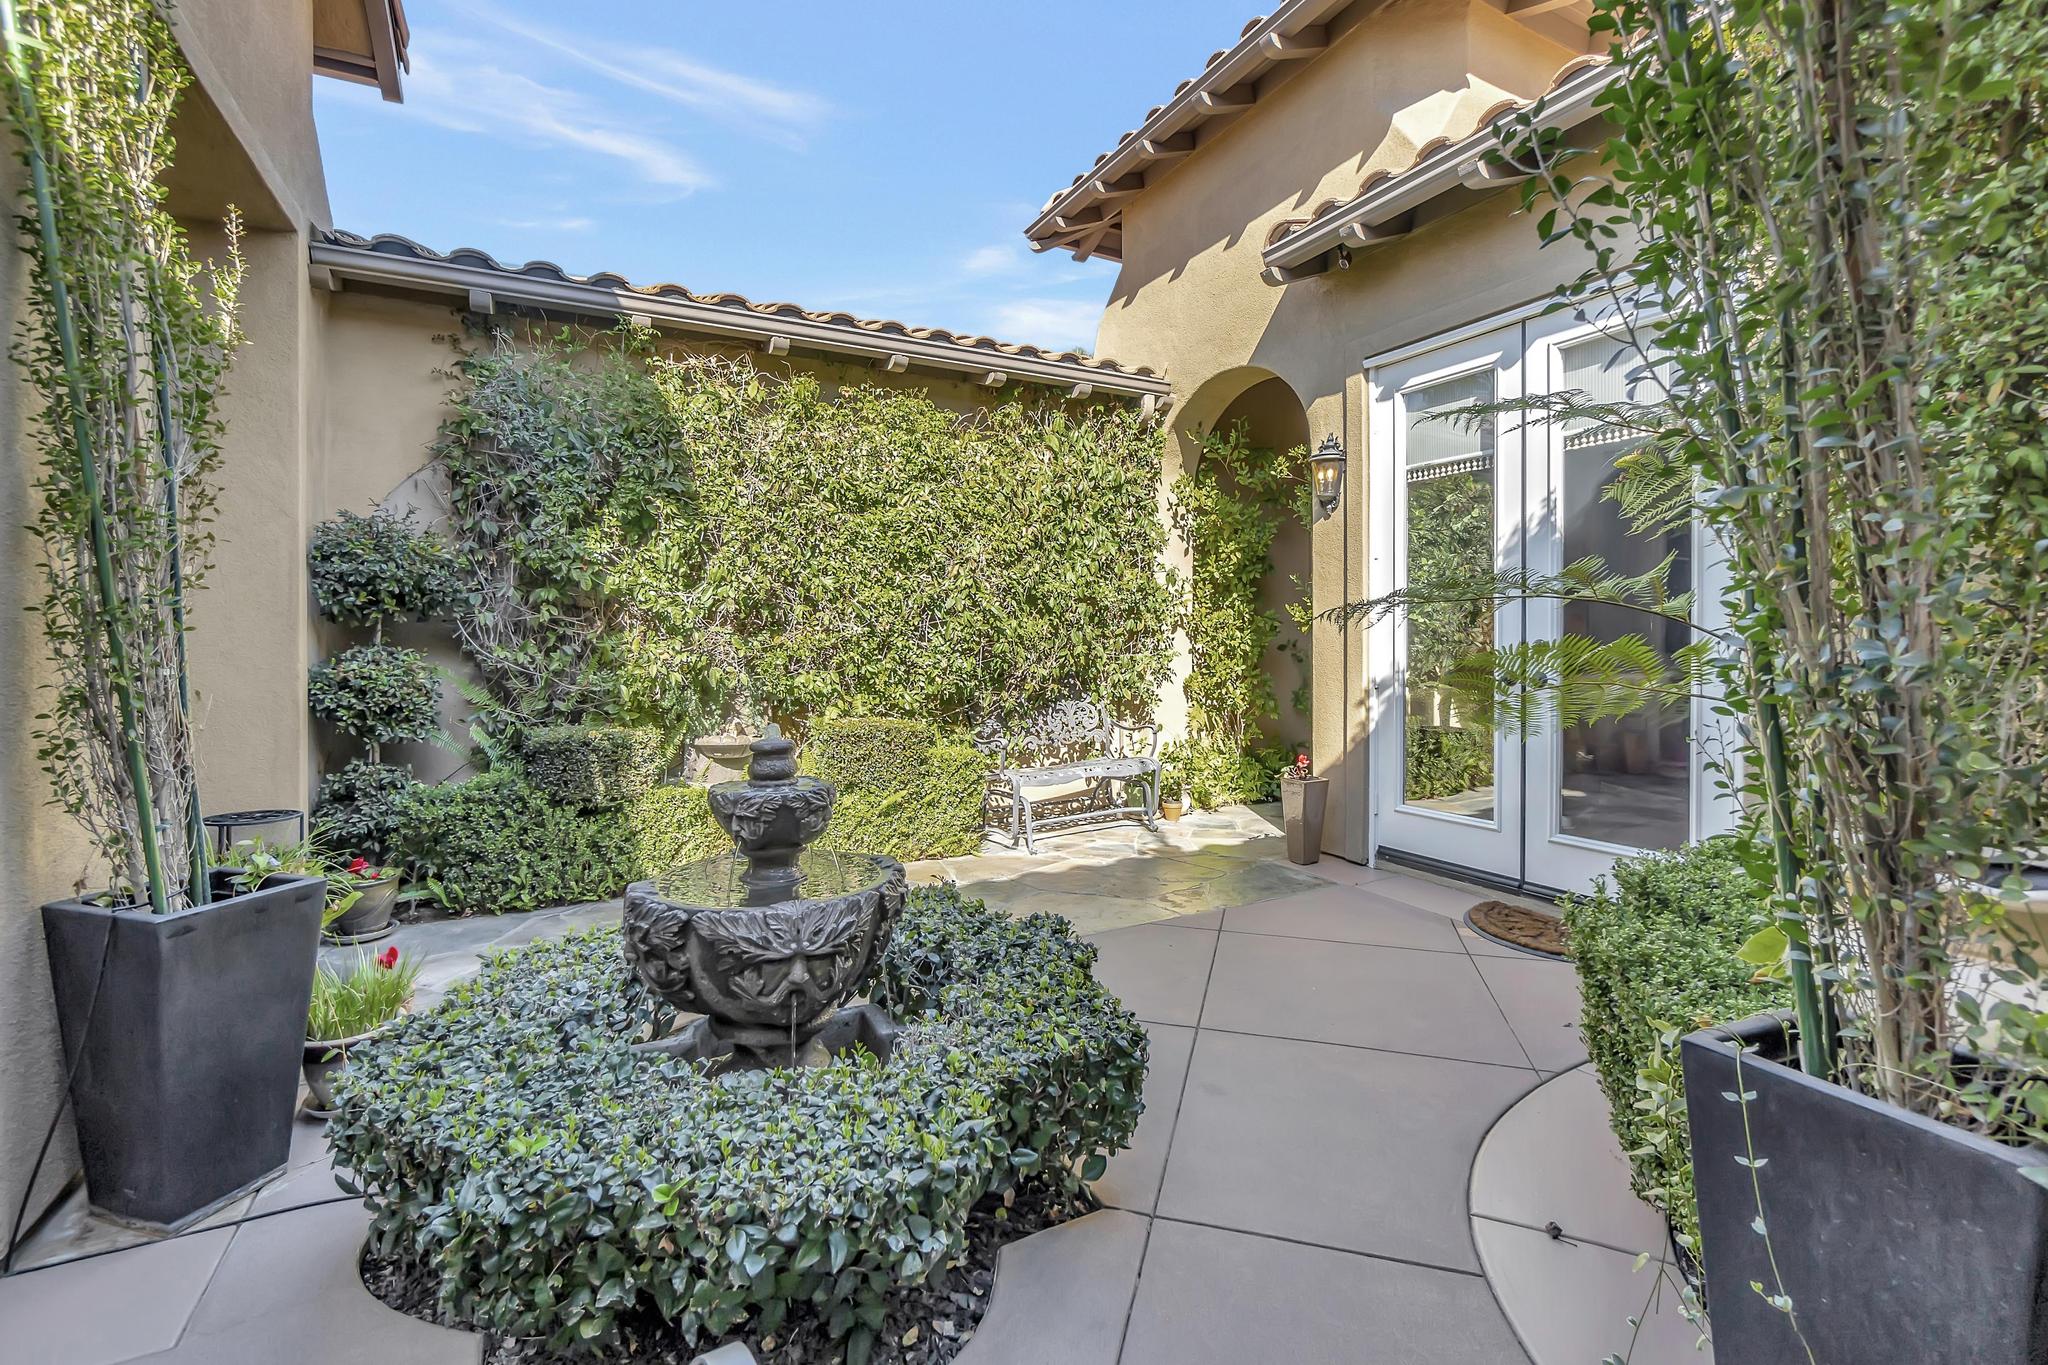 Tuscan-Inspired Olinda Ranch Villa – 467 Tangerine Place, Brea, CA 92823 - View of Front Fountain, French Doors and Fountain